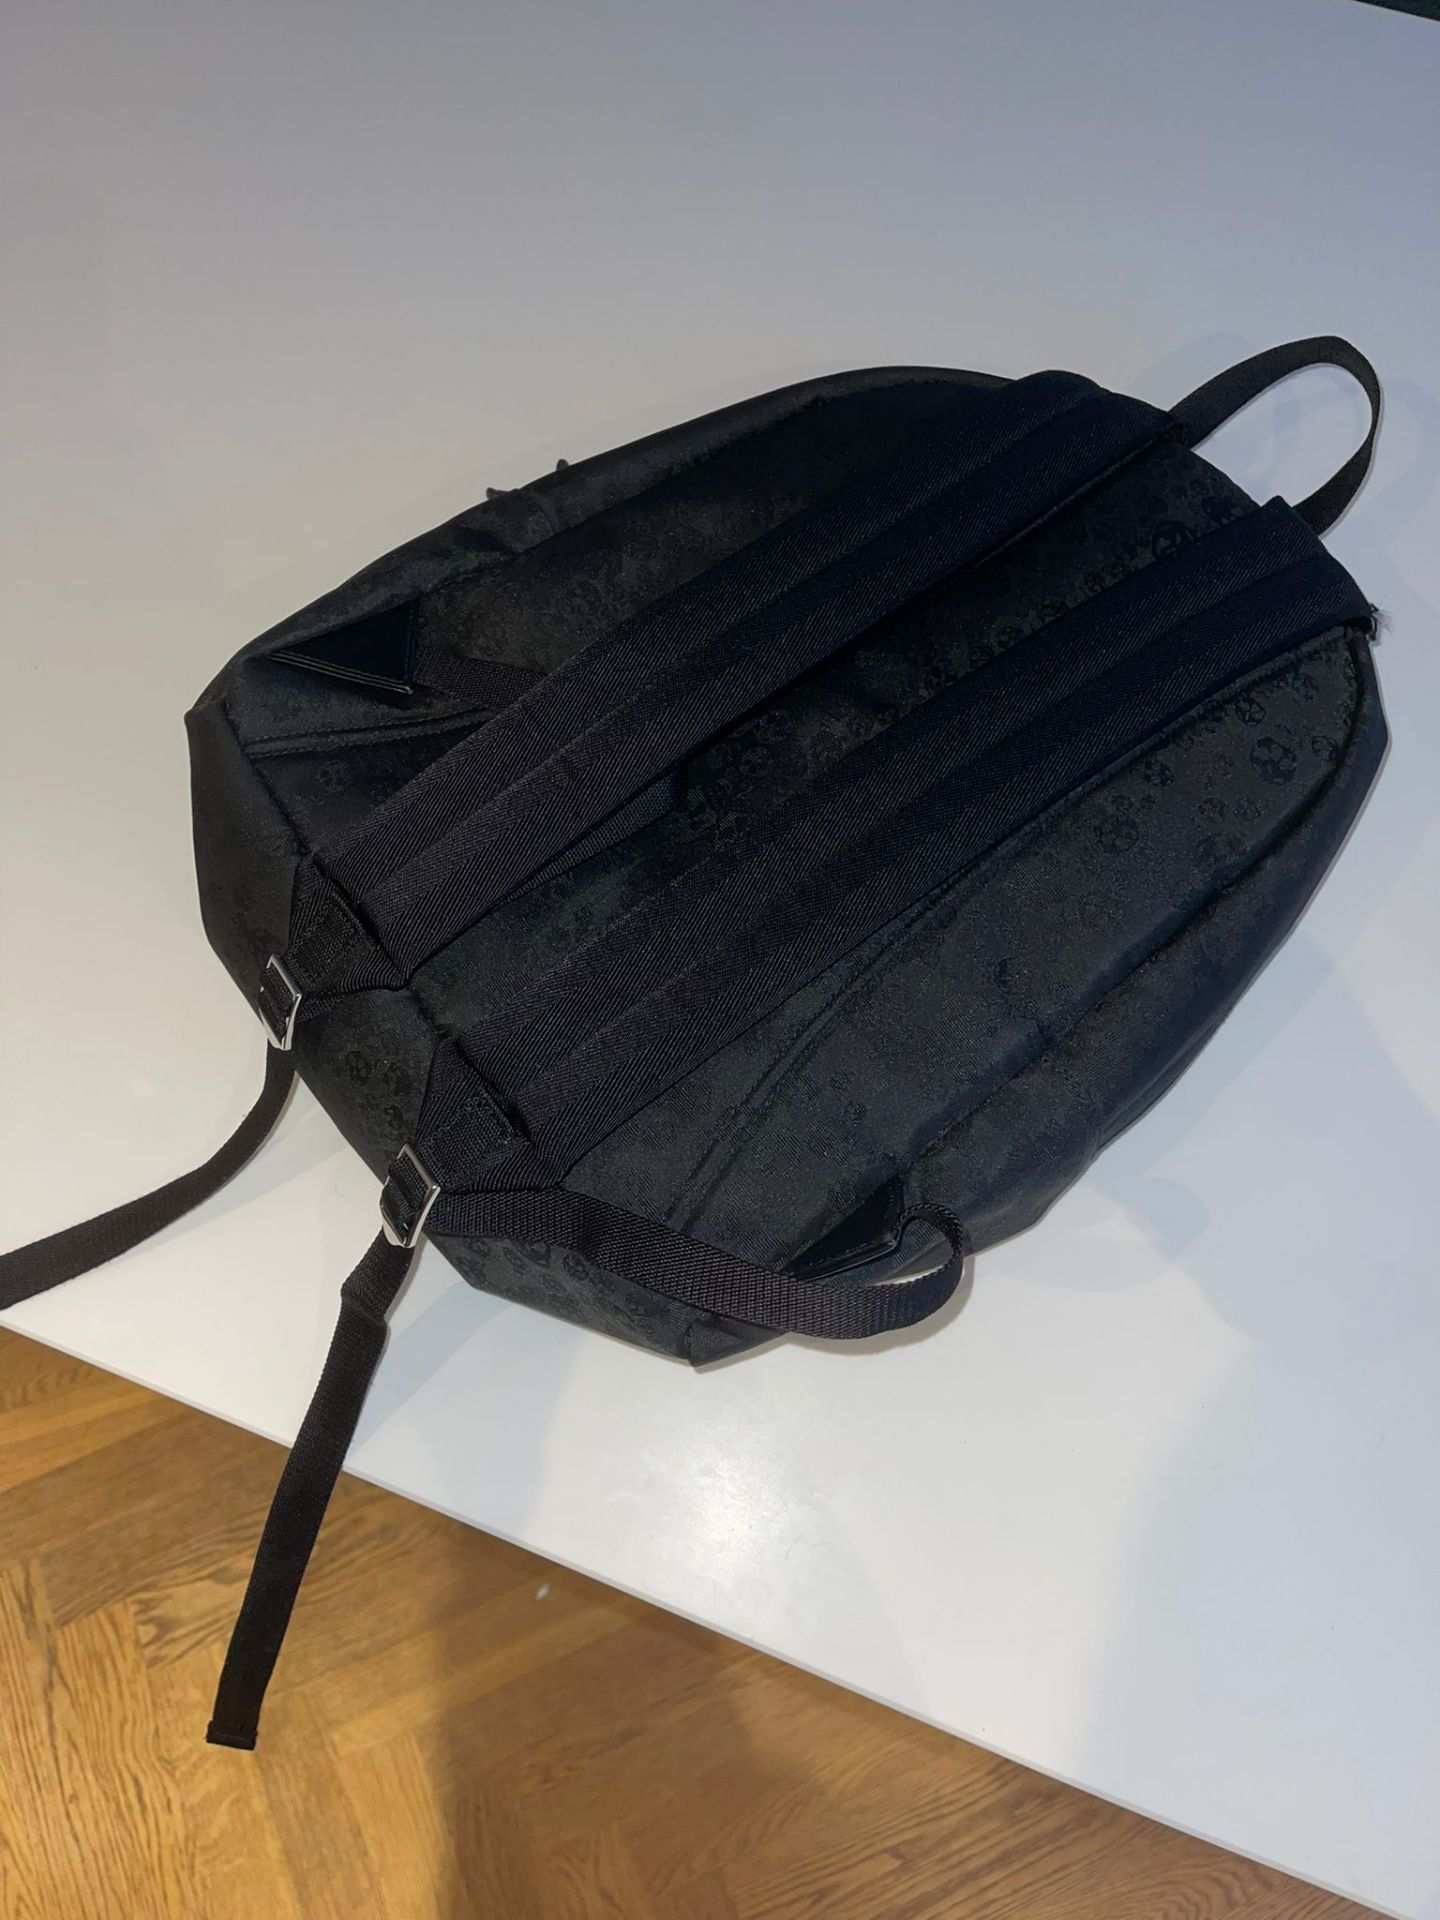 Alexander McQueen Men's Black Graphic Print Backpack, small rip by one of the straps. in black - Image 2 of 3